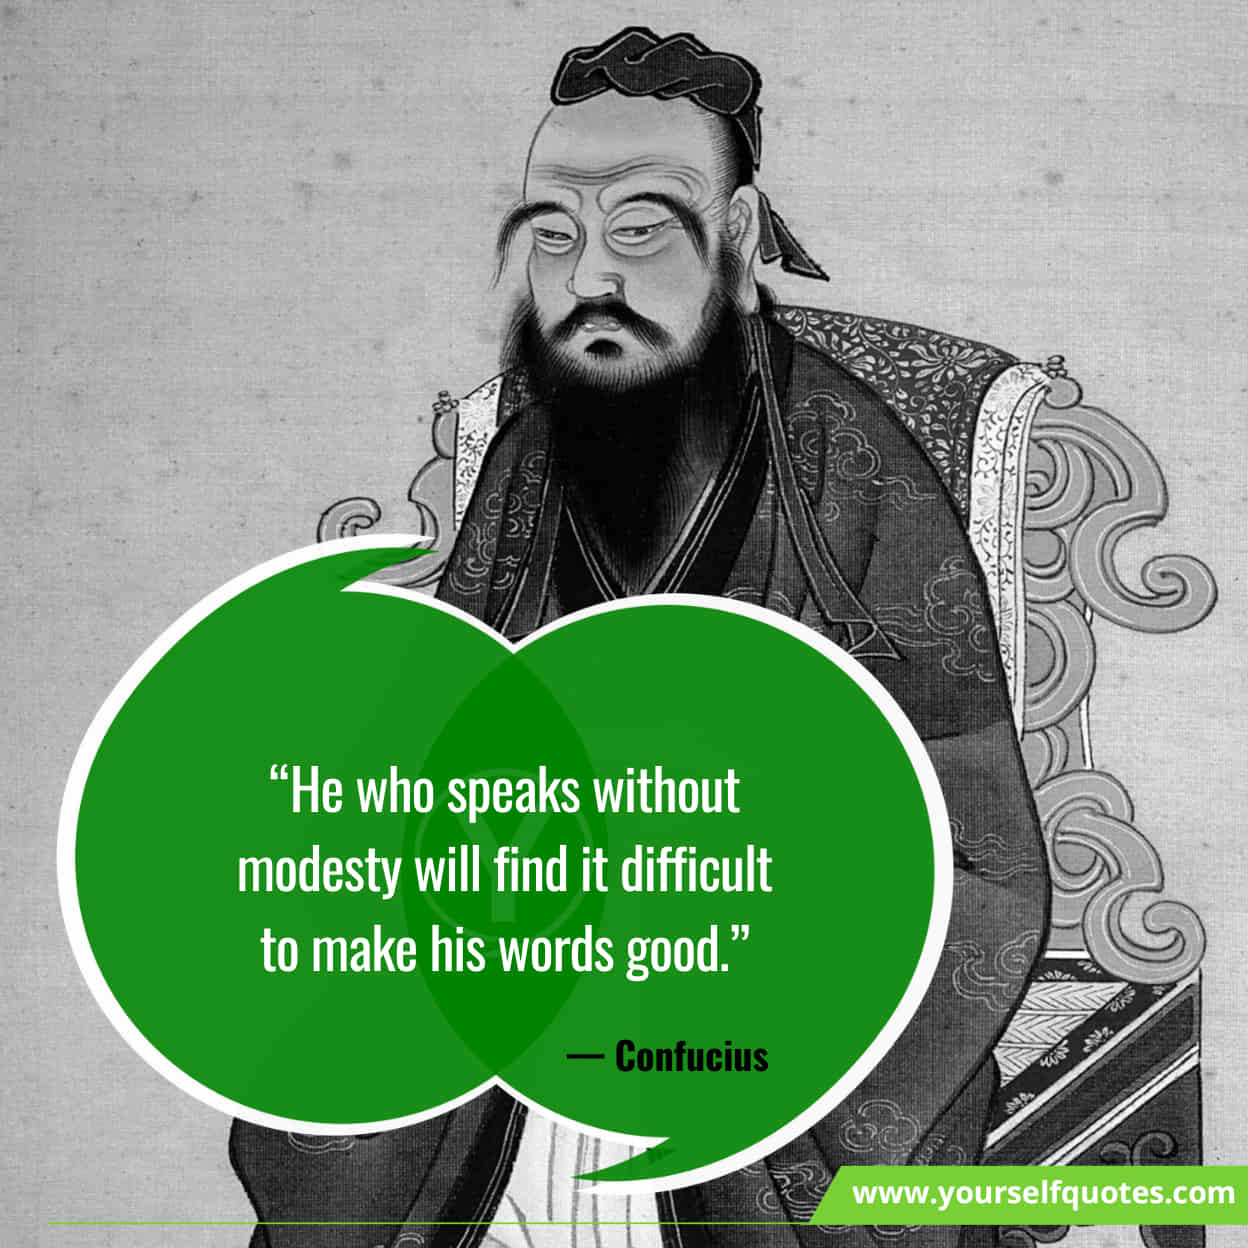 Confucius Quotes About Questioning